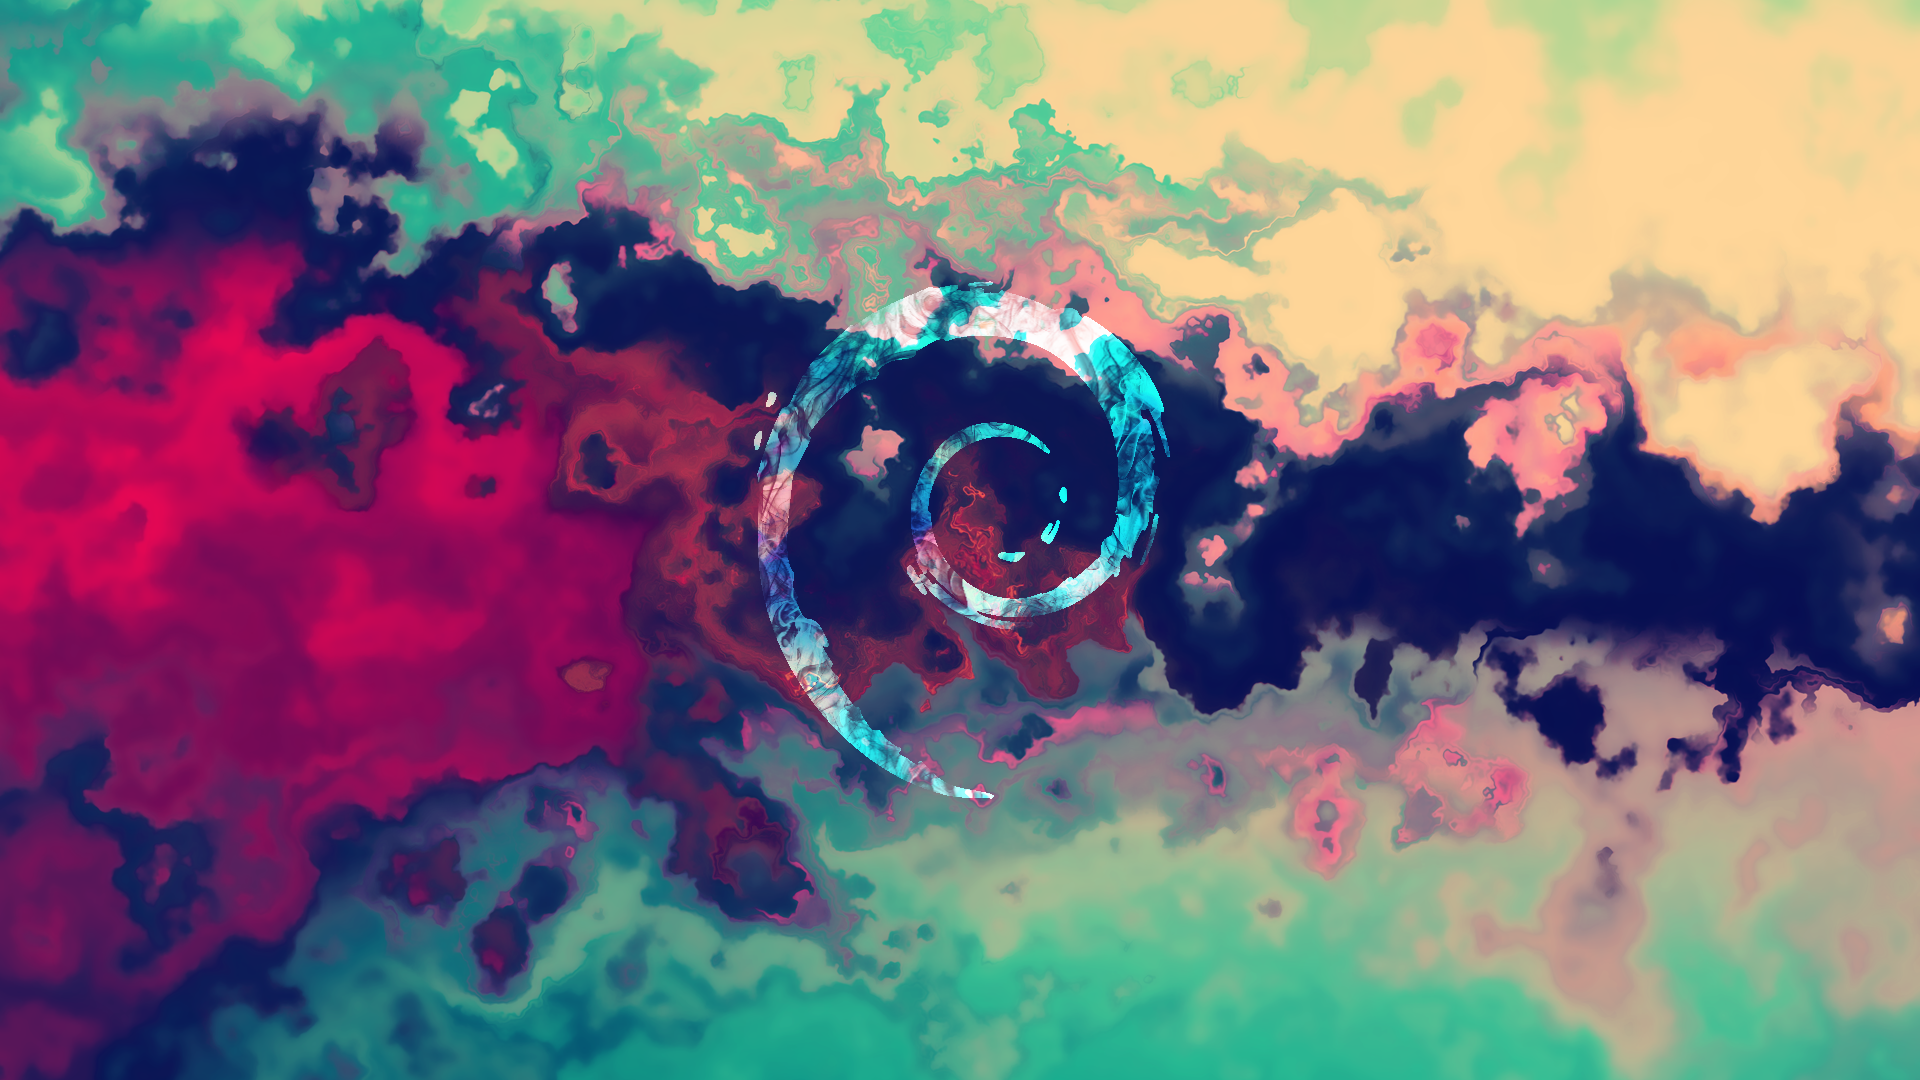 Linux Debian Operating System Abstract Colorful Digital Art 1920x1080